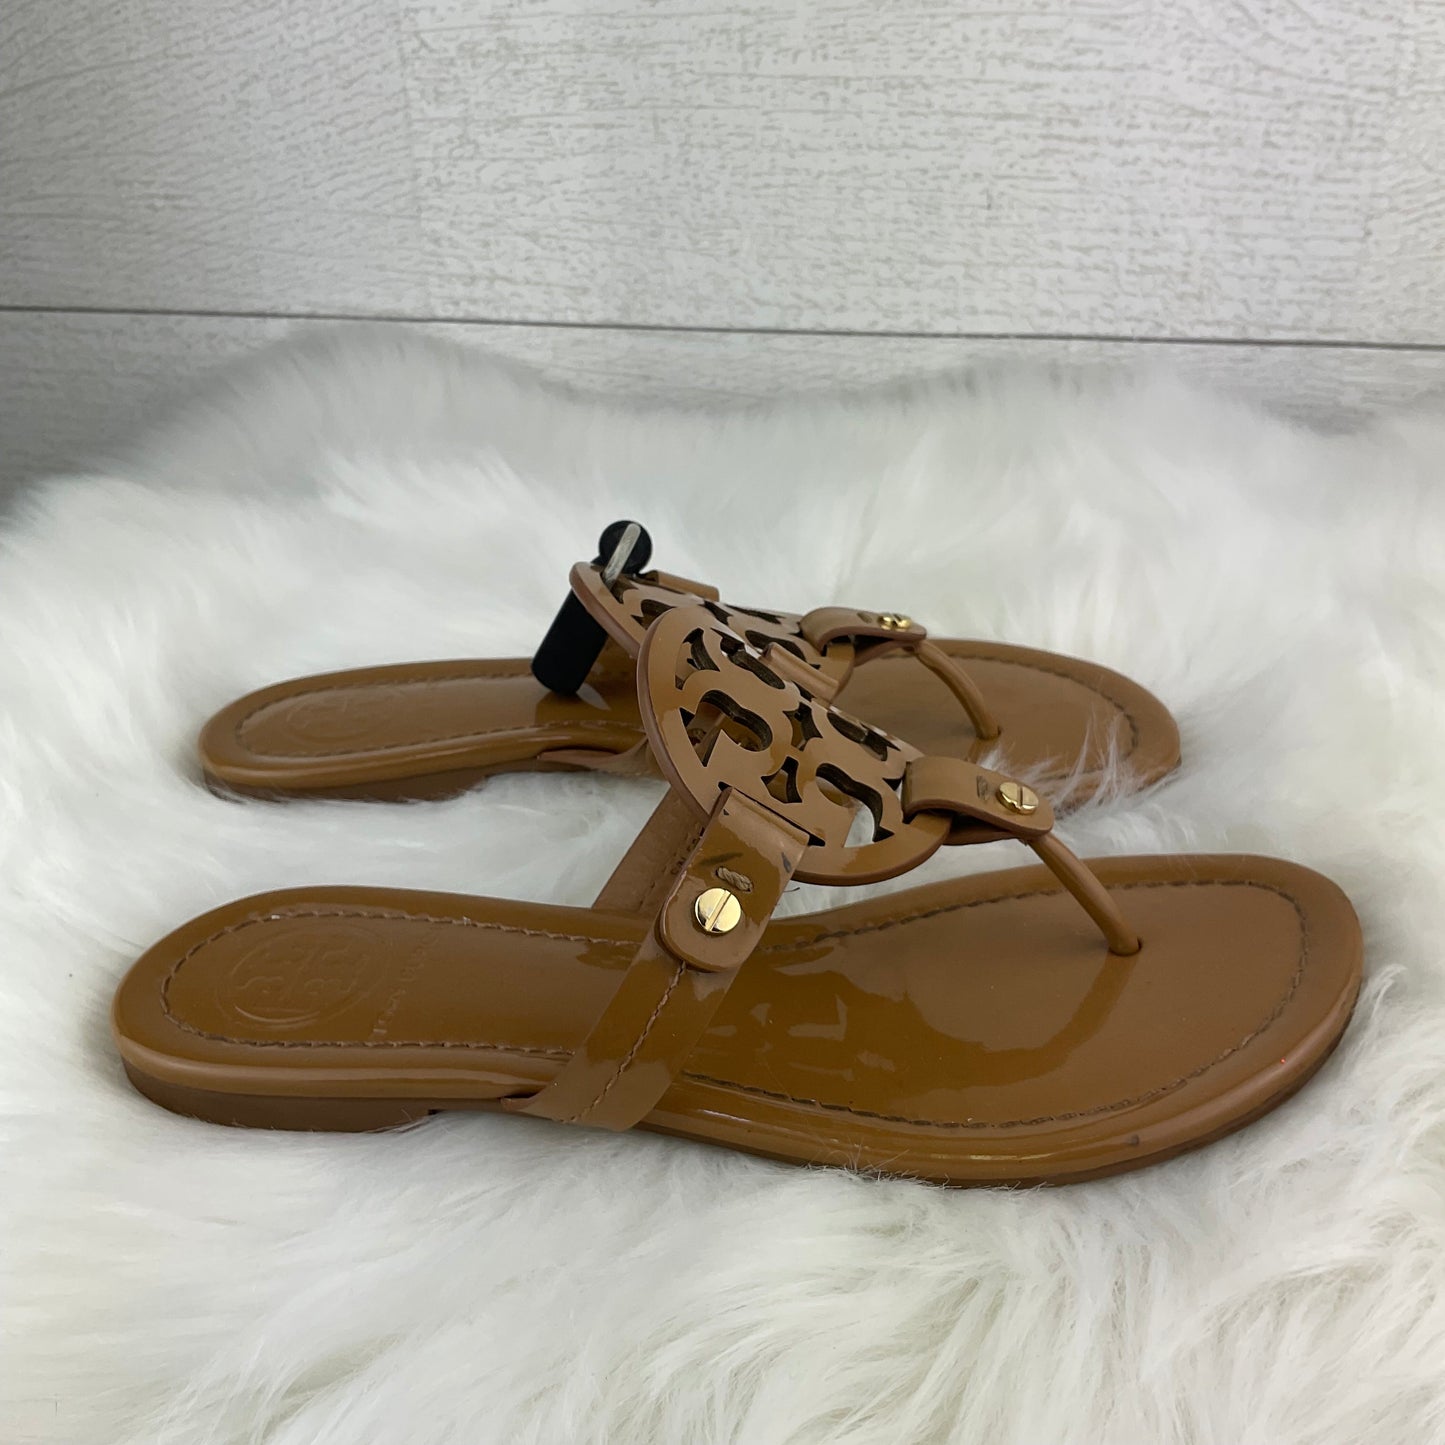 Brown Shoes Flats Tory Burch, Size 5